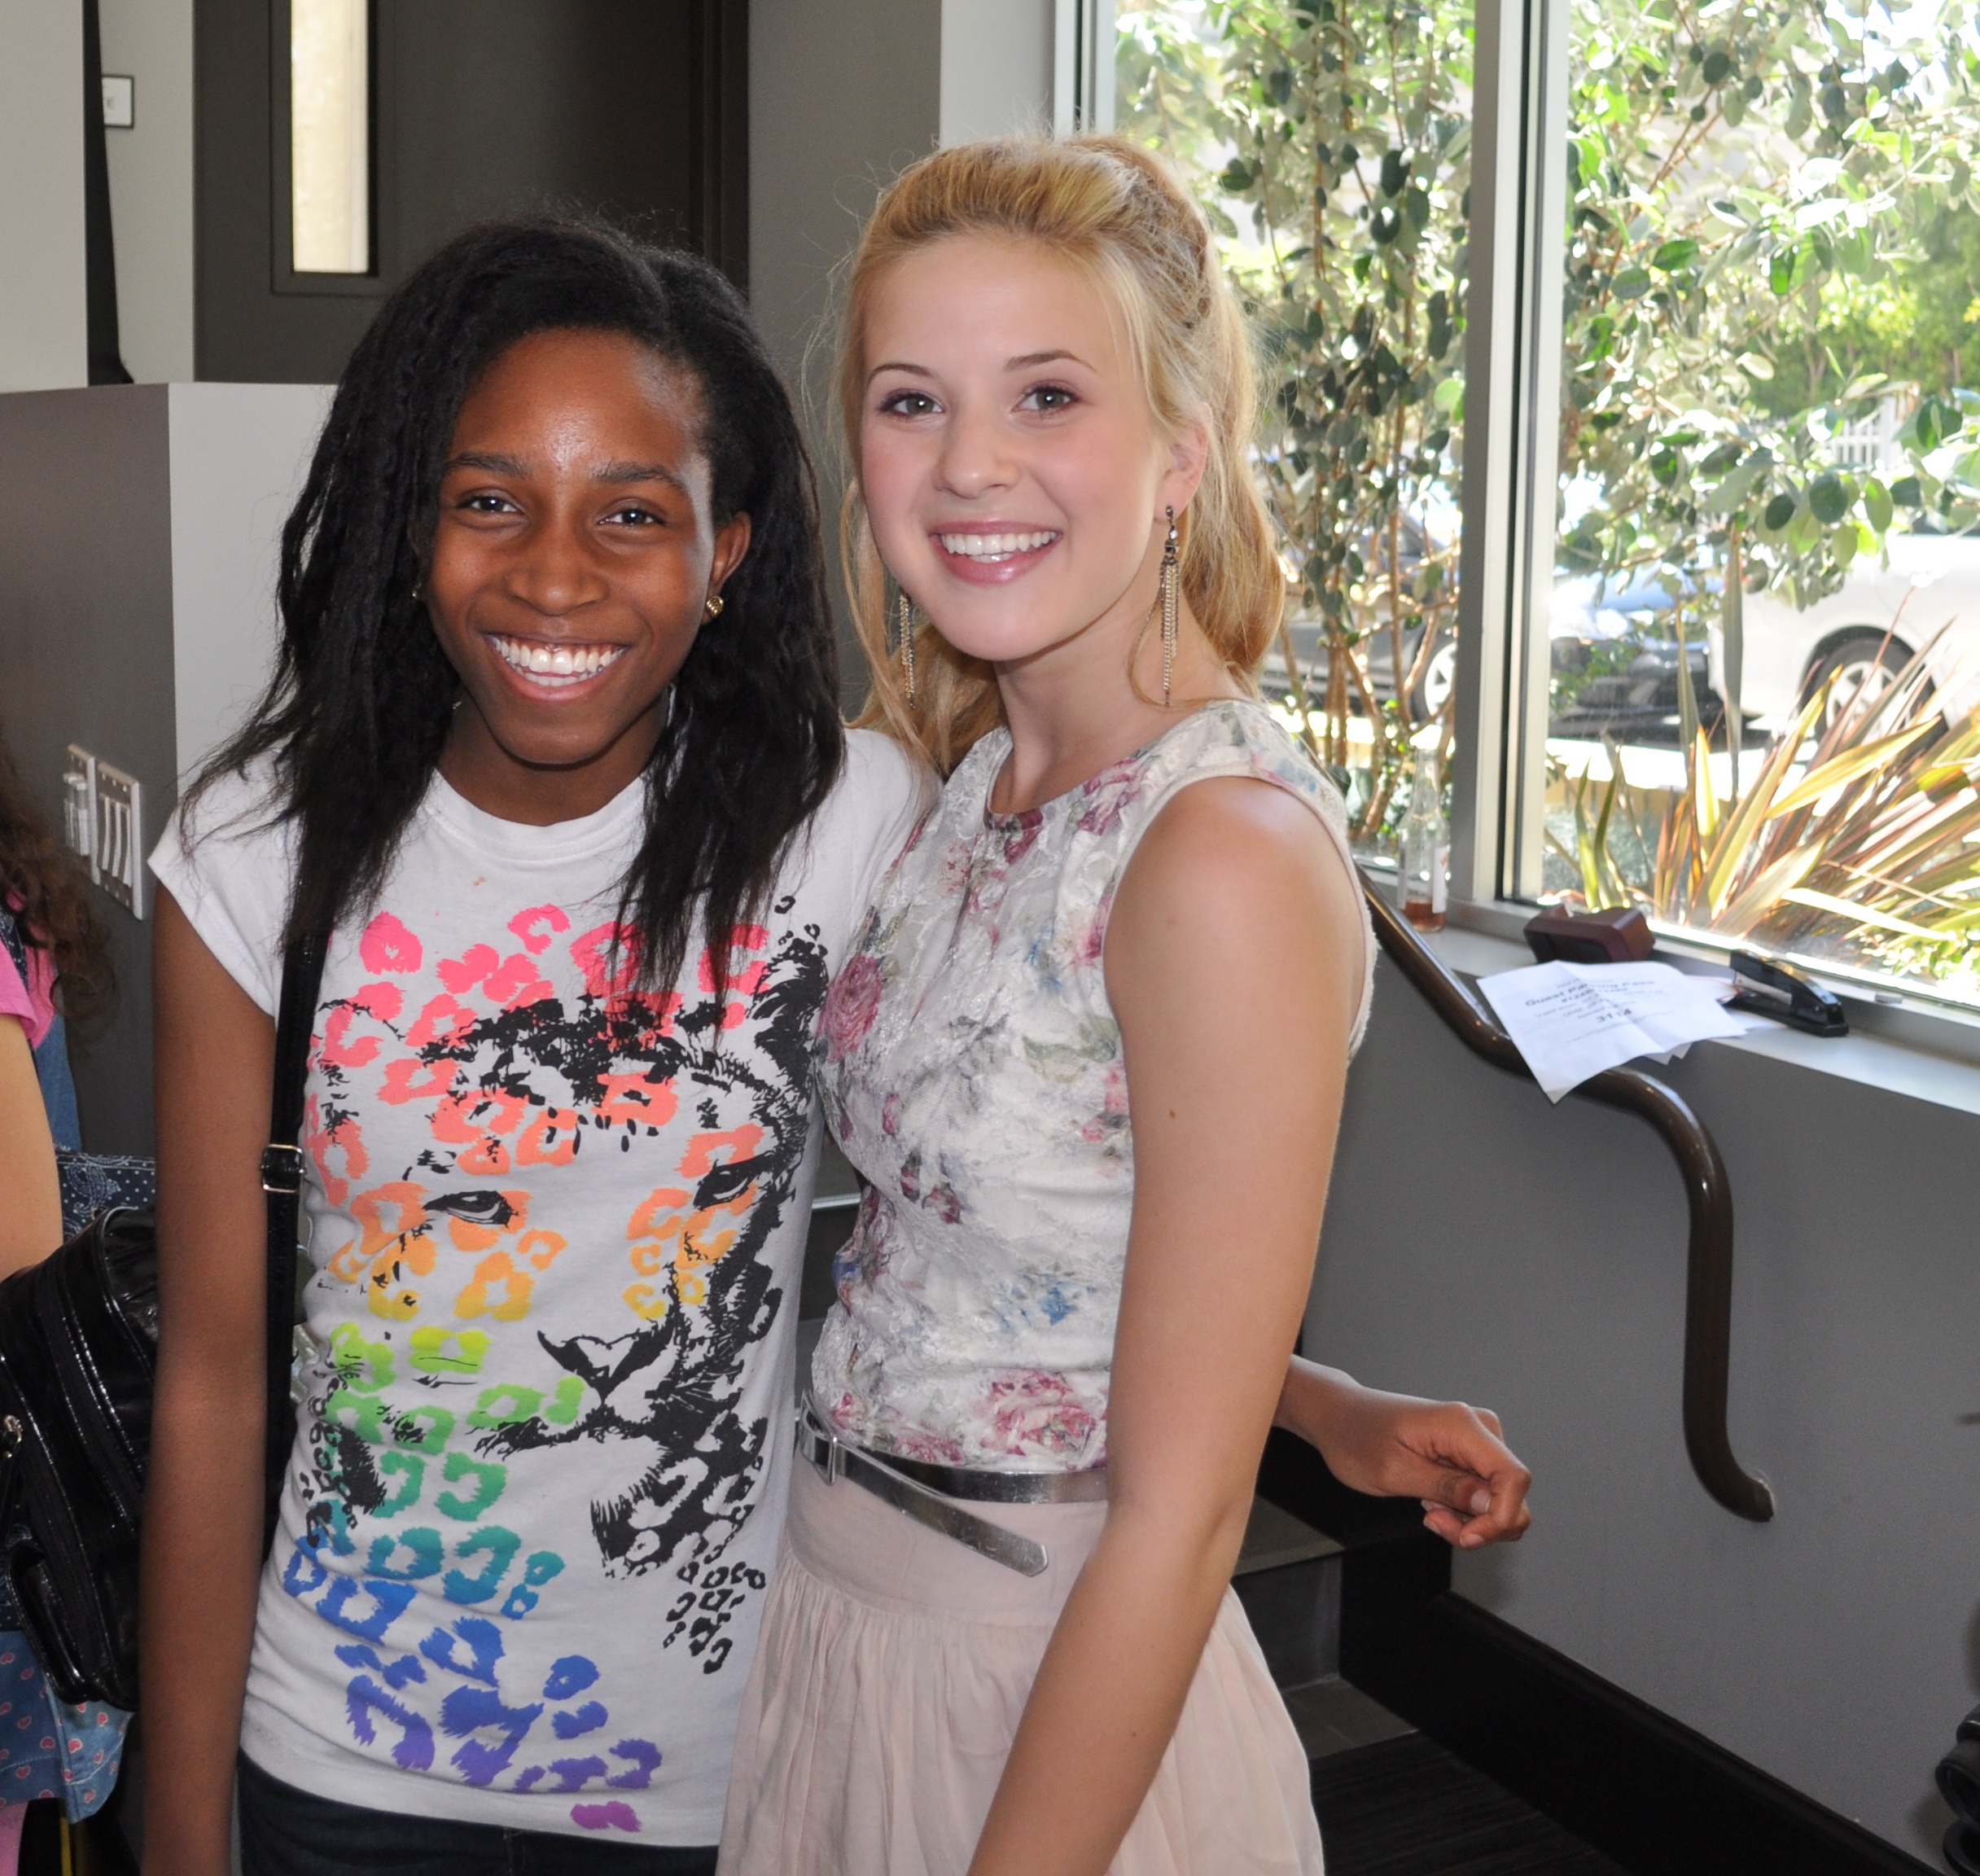 Favour with Caroline Sunshine (Shake it Up) at Ice Cream for Breakfast Charity Event